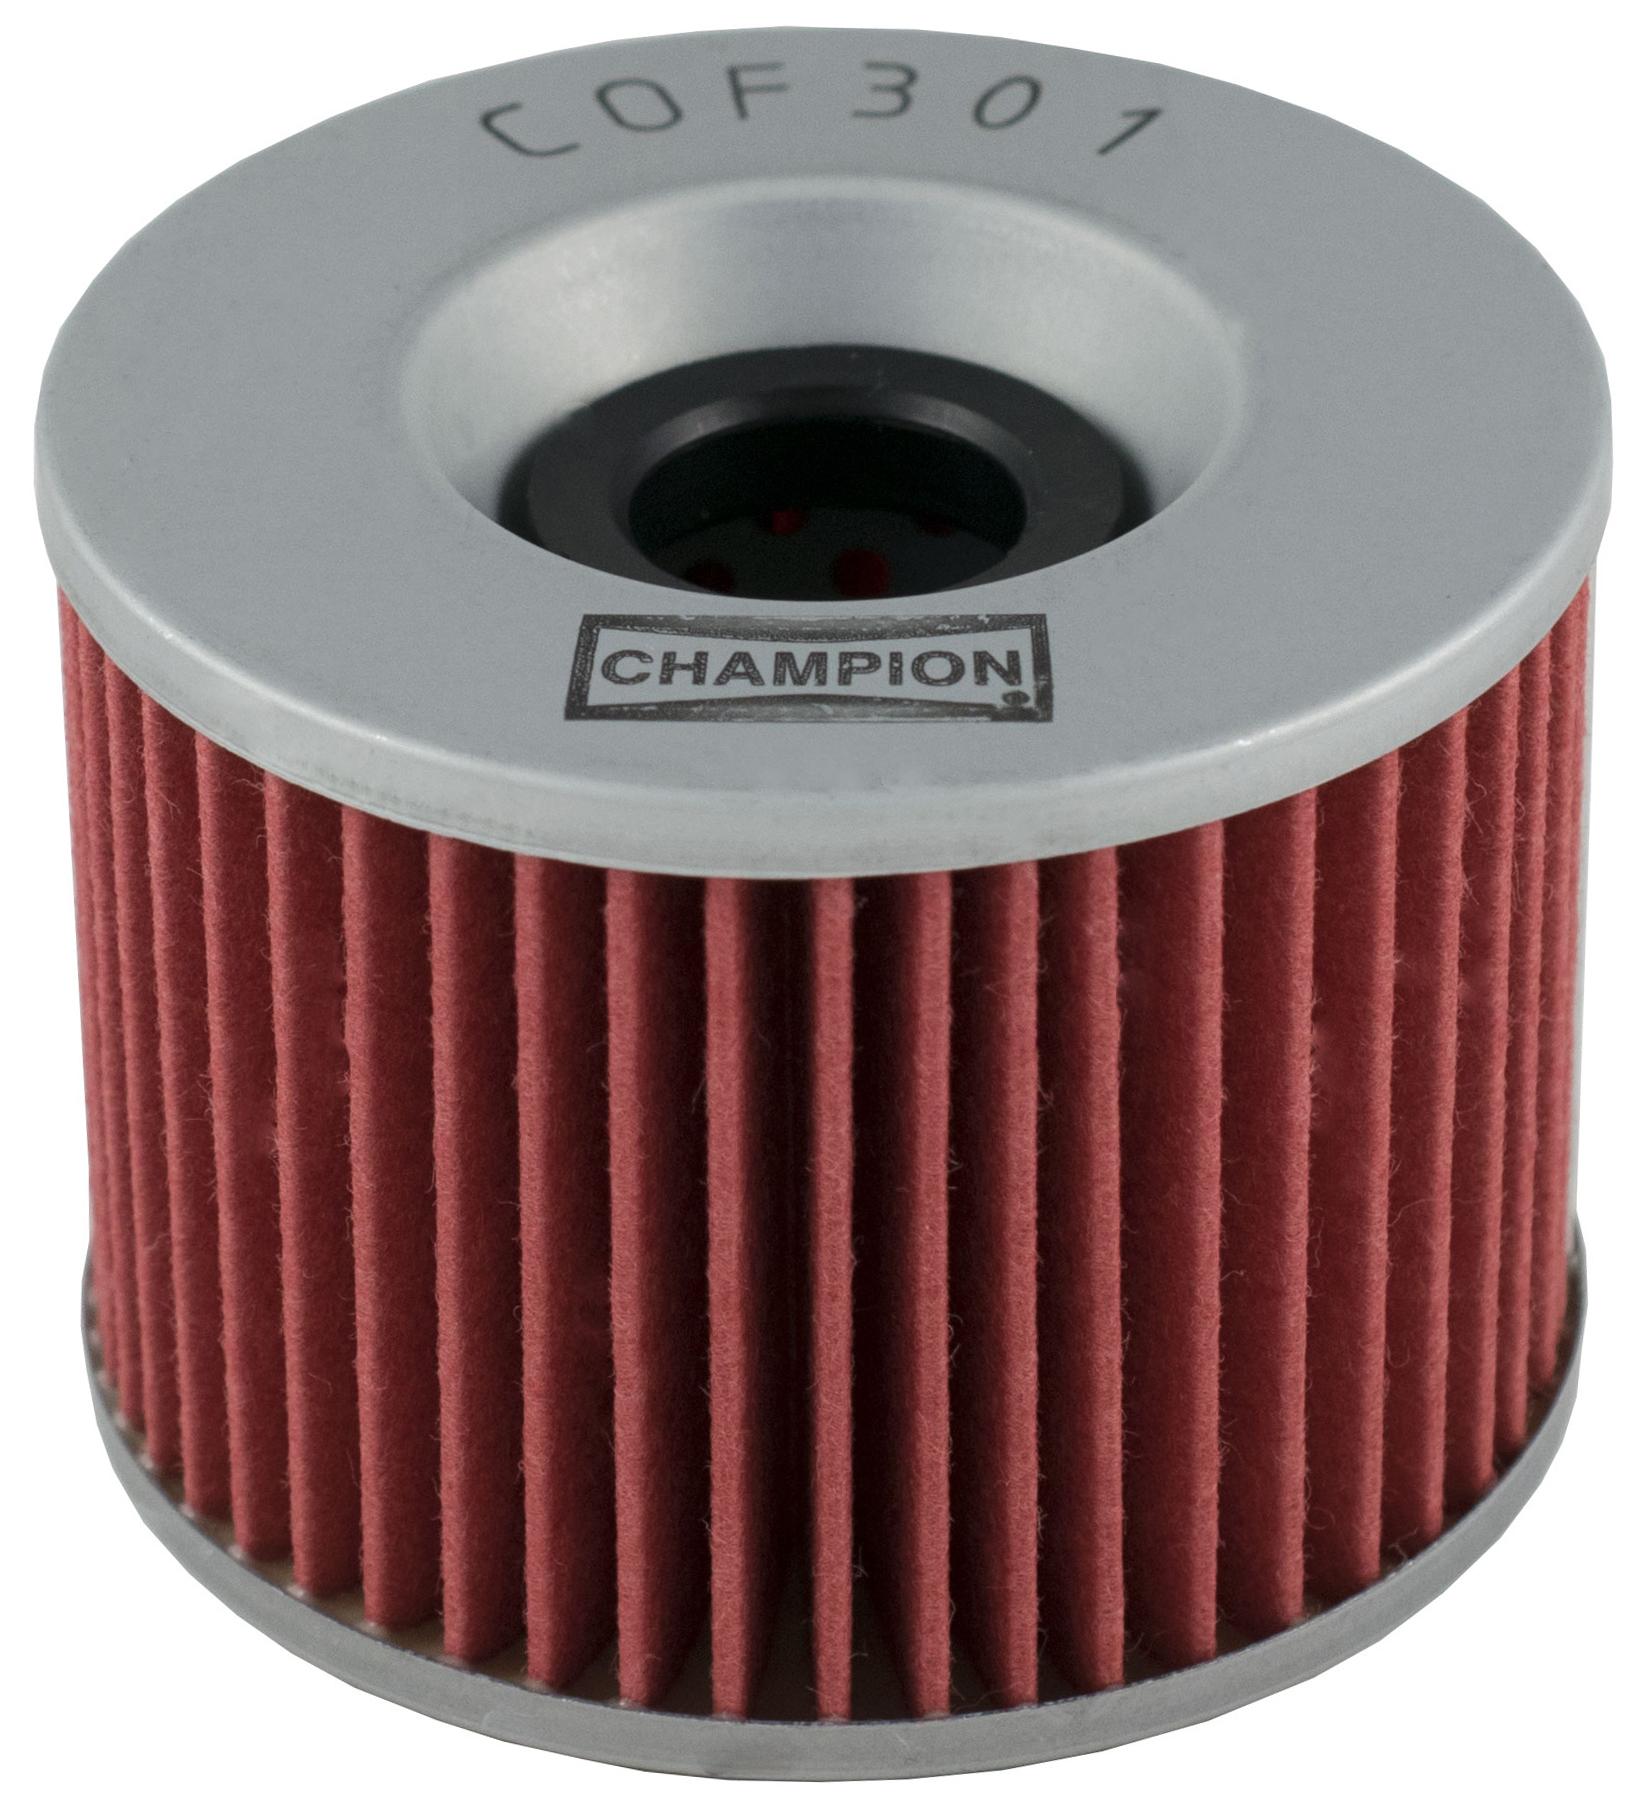 Champion Motorcycle Oil Filter X321 Product Description